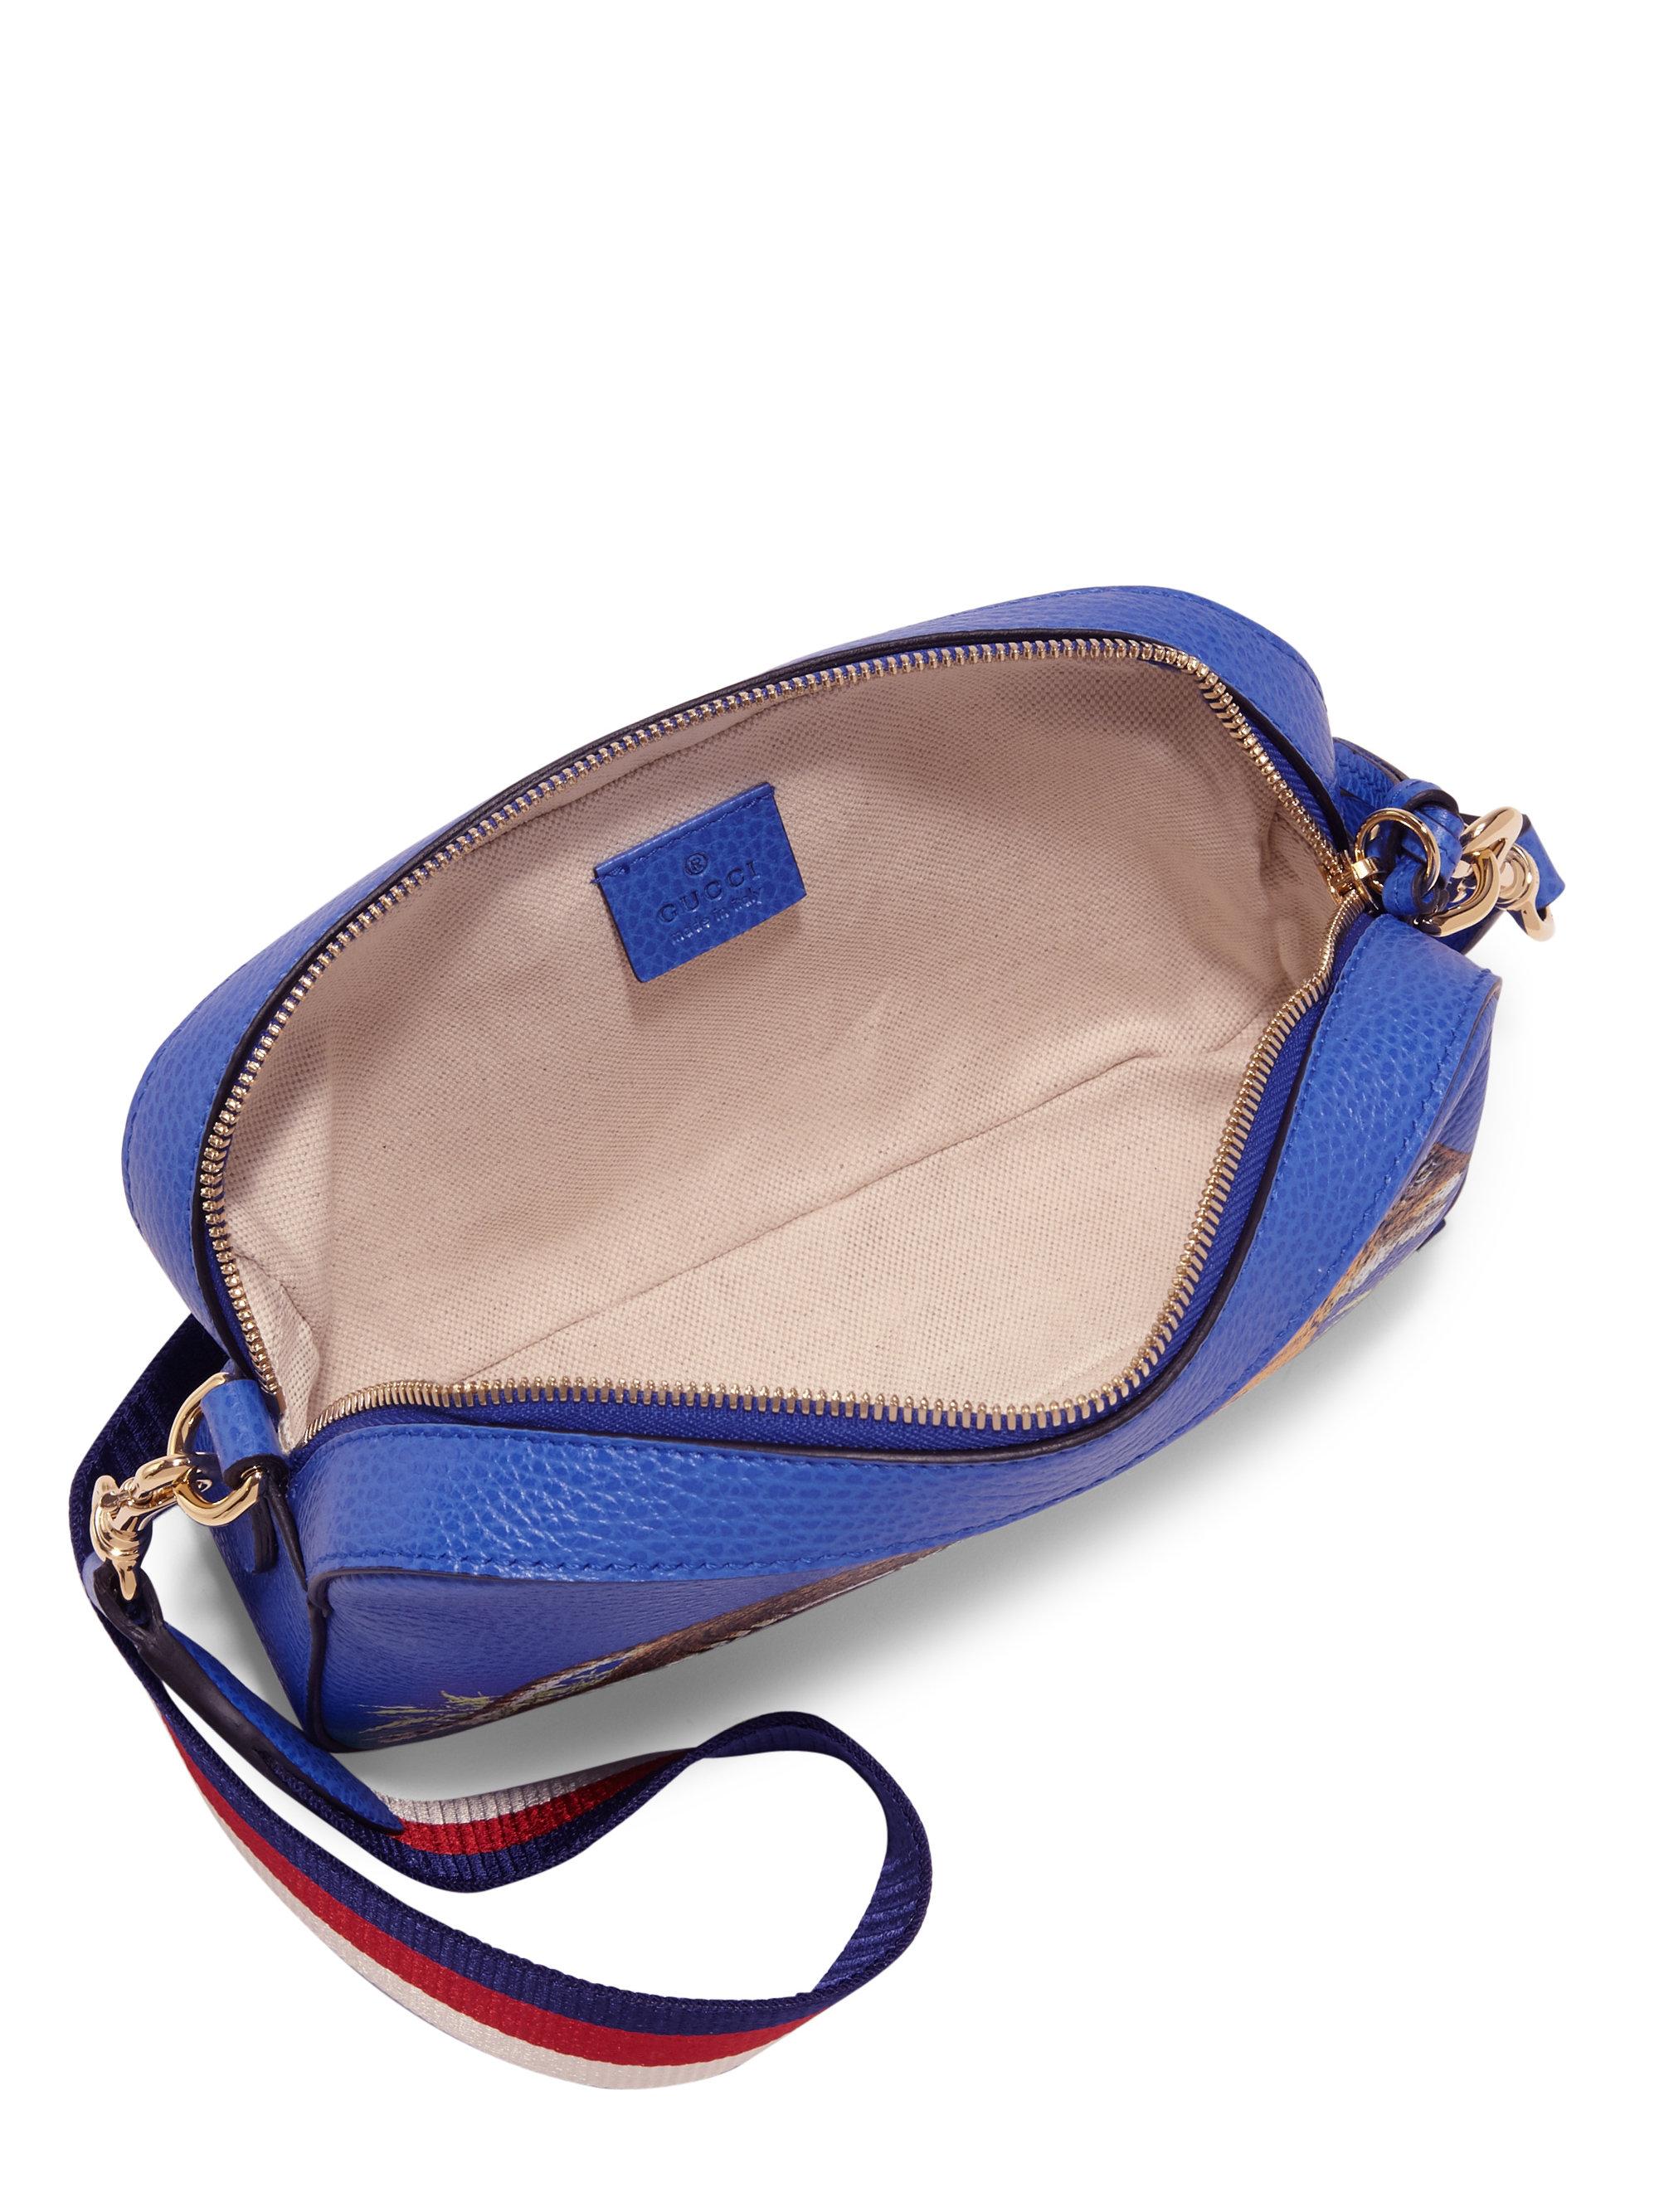 Lyst - Gucci Tiger Leather Camera Bag in Blue